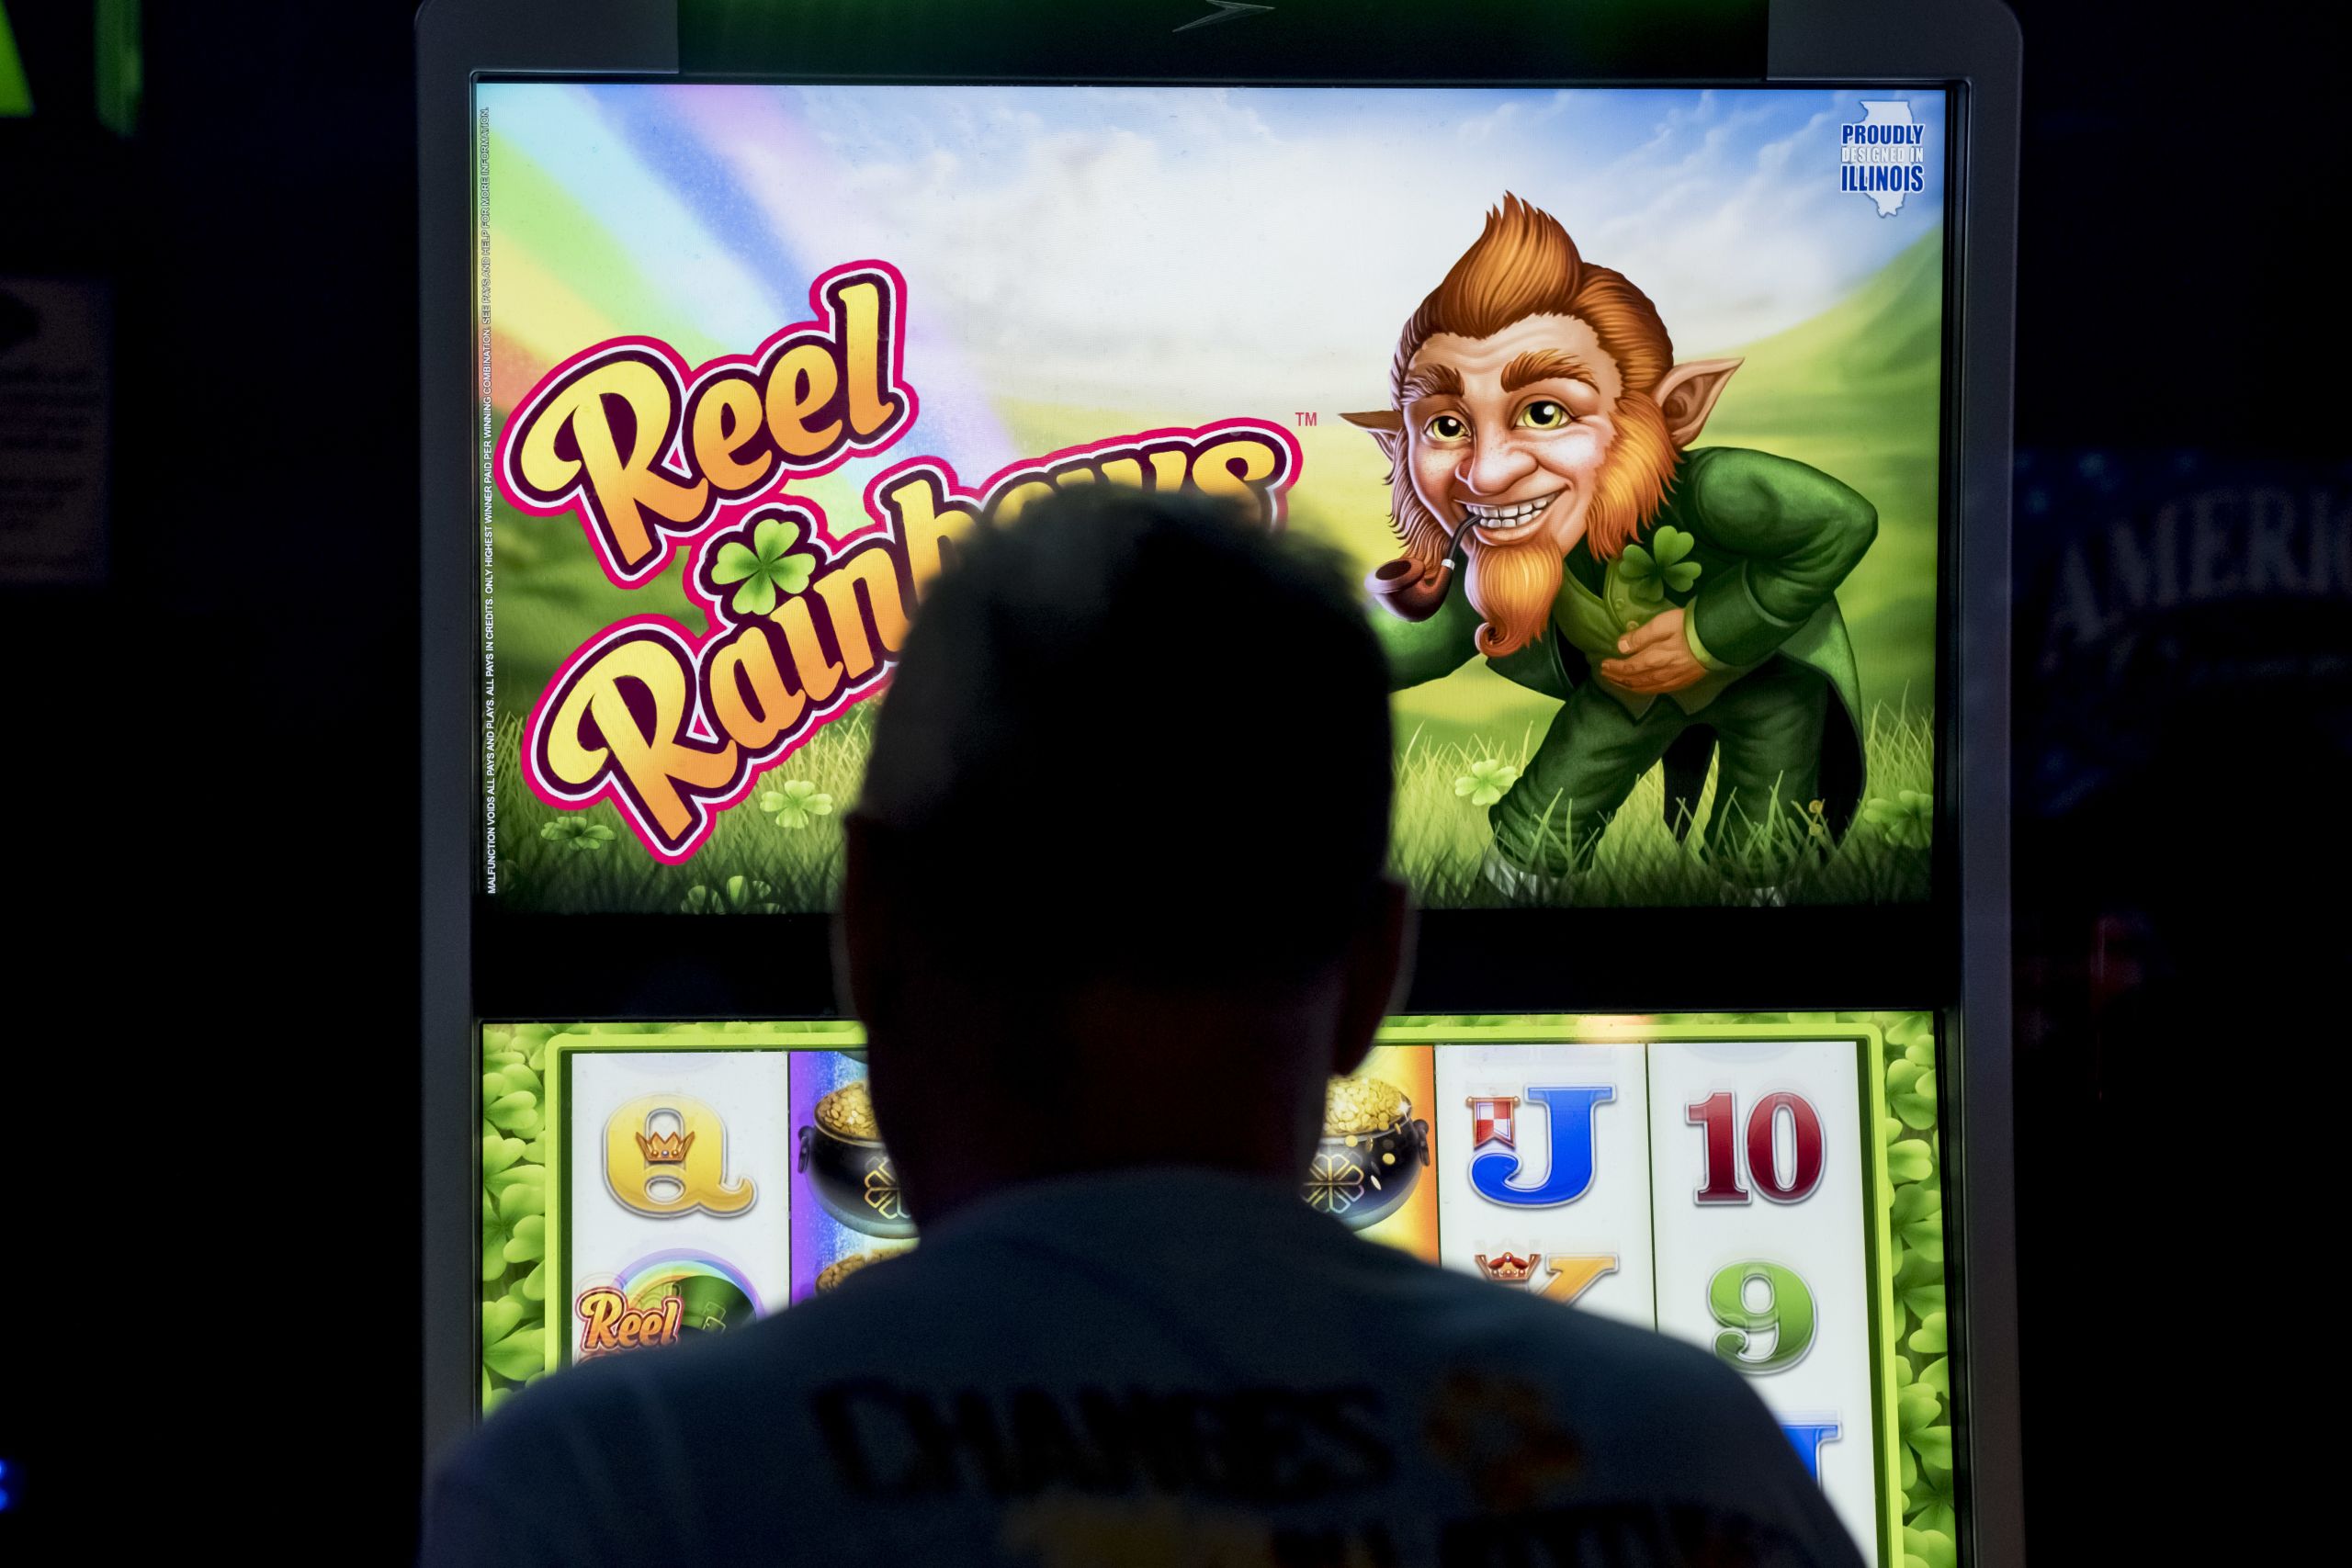 A man plays a video slot machine in a lounge at Huck's, a truck stop in Mount Vernon, Ill., on Sept. 25, 2018. (Whitney Curtis, special to ProPublica Illinois)